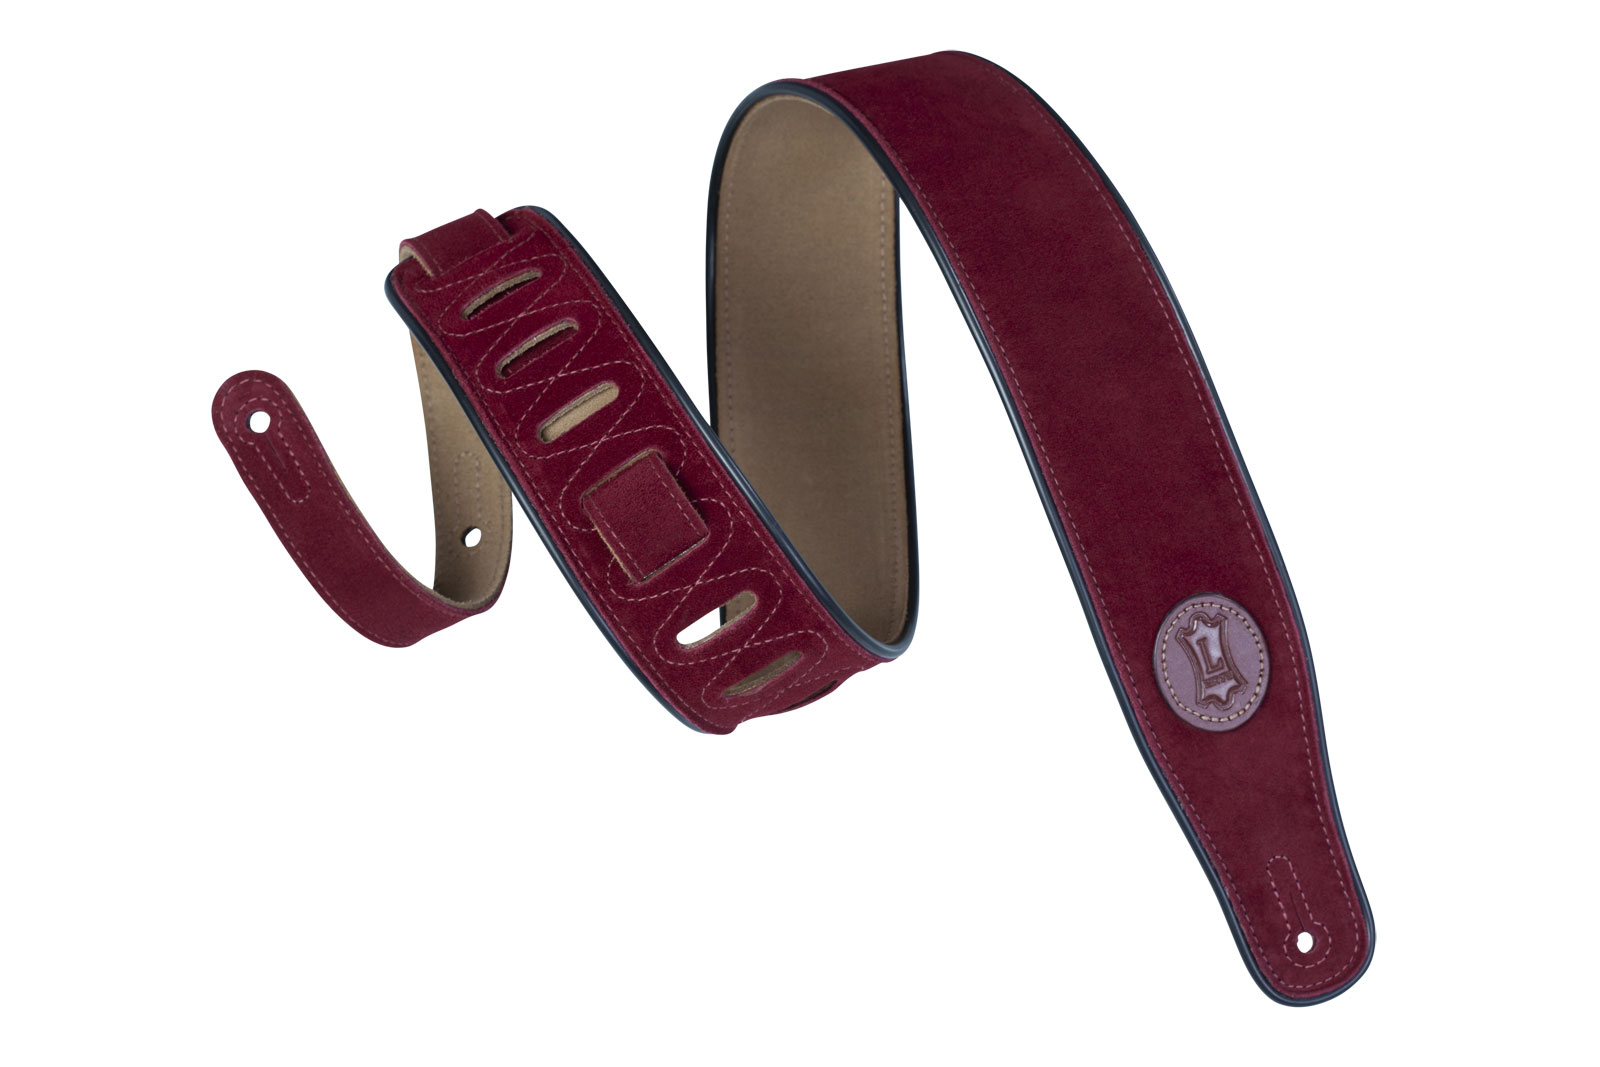 LEVY'S 6.4 CM WITH BLACK BORDER WITH BURGUNDY LEATHER LEVY'S LOGO